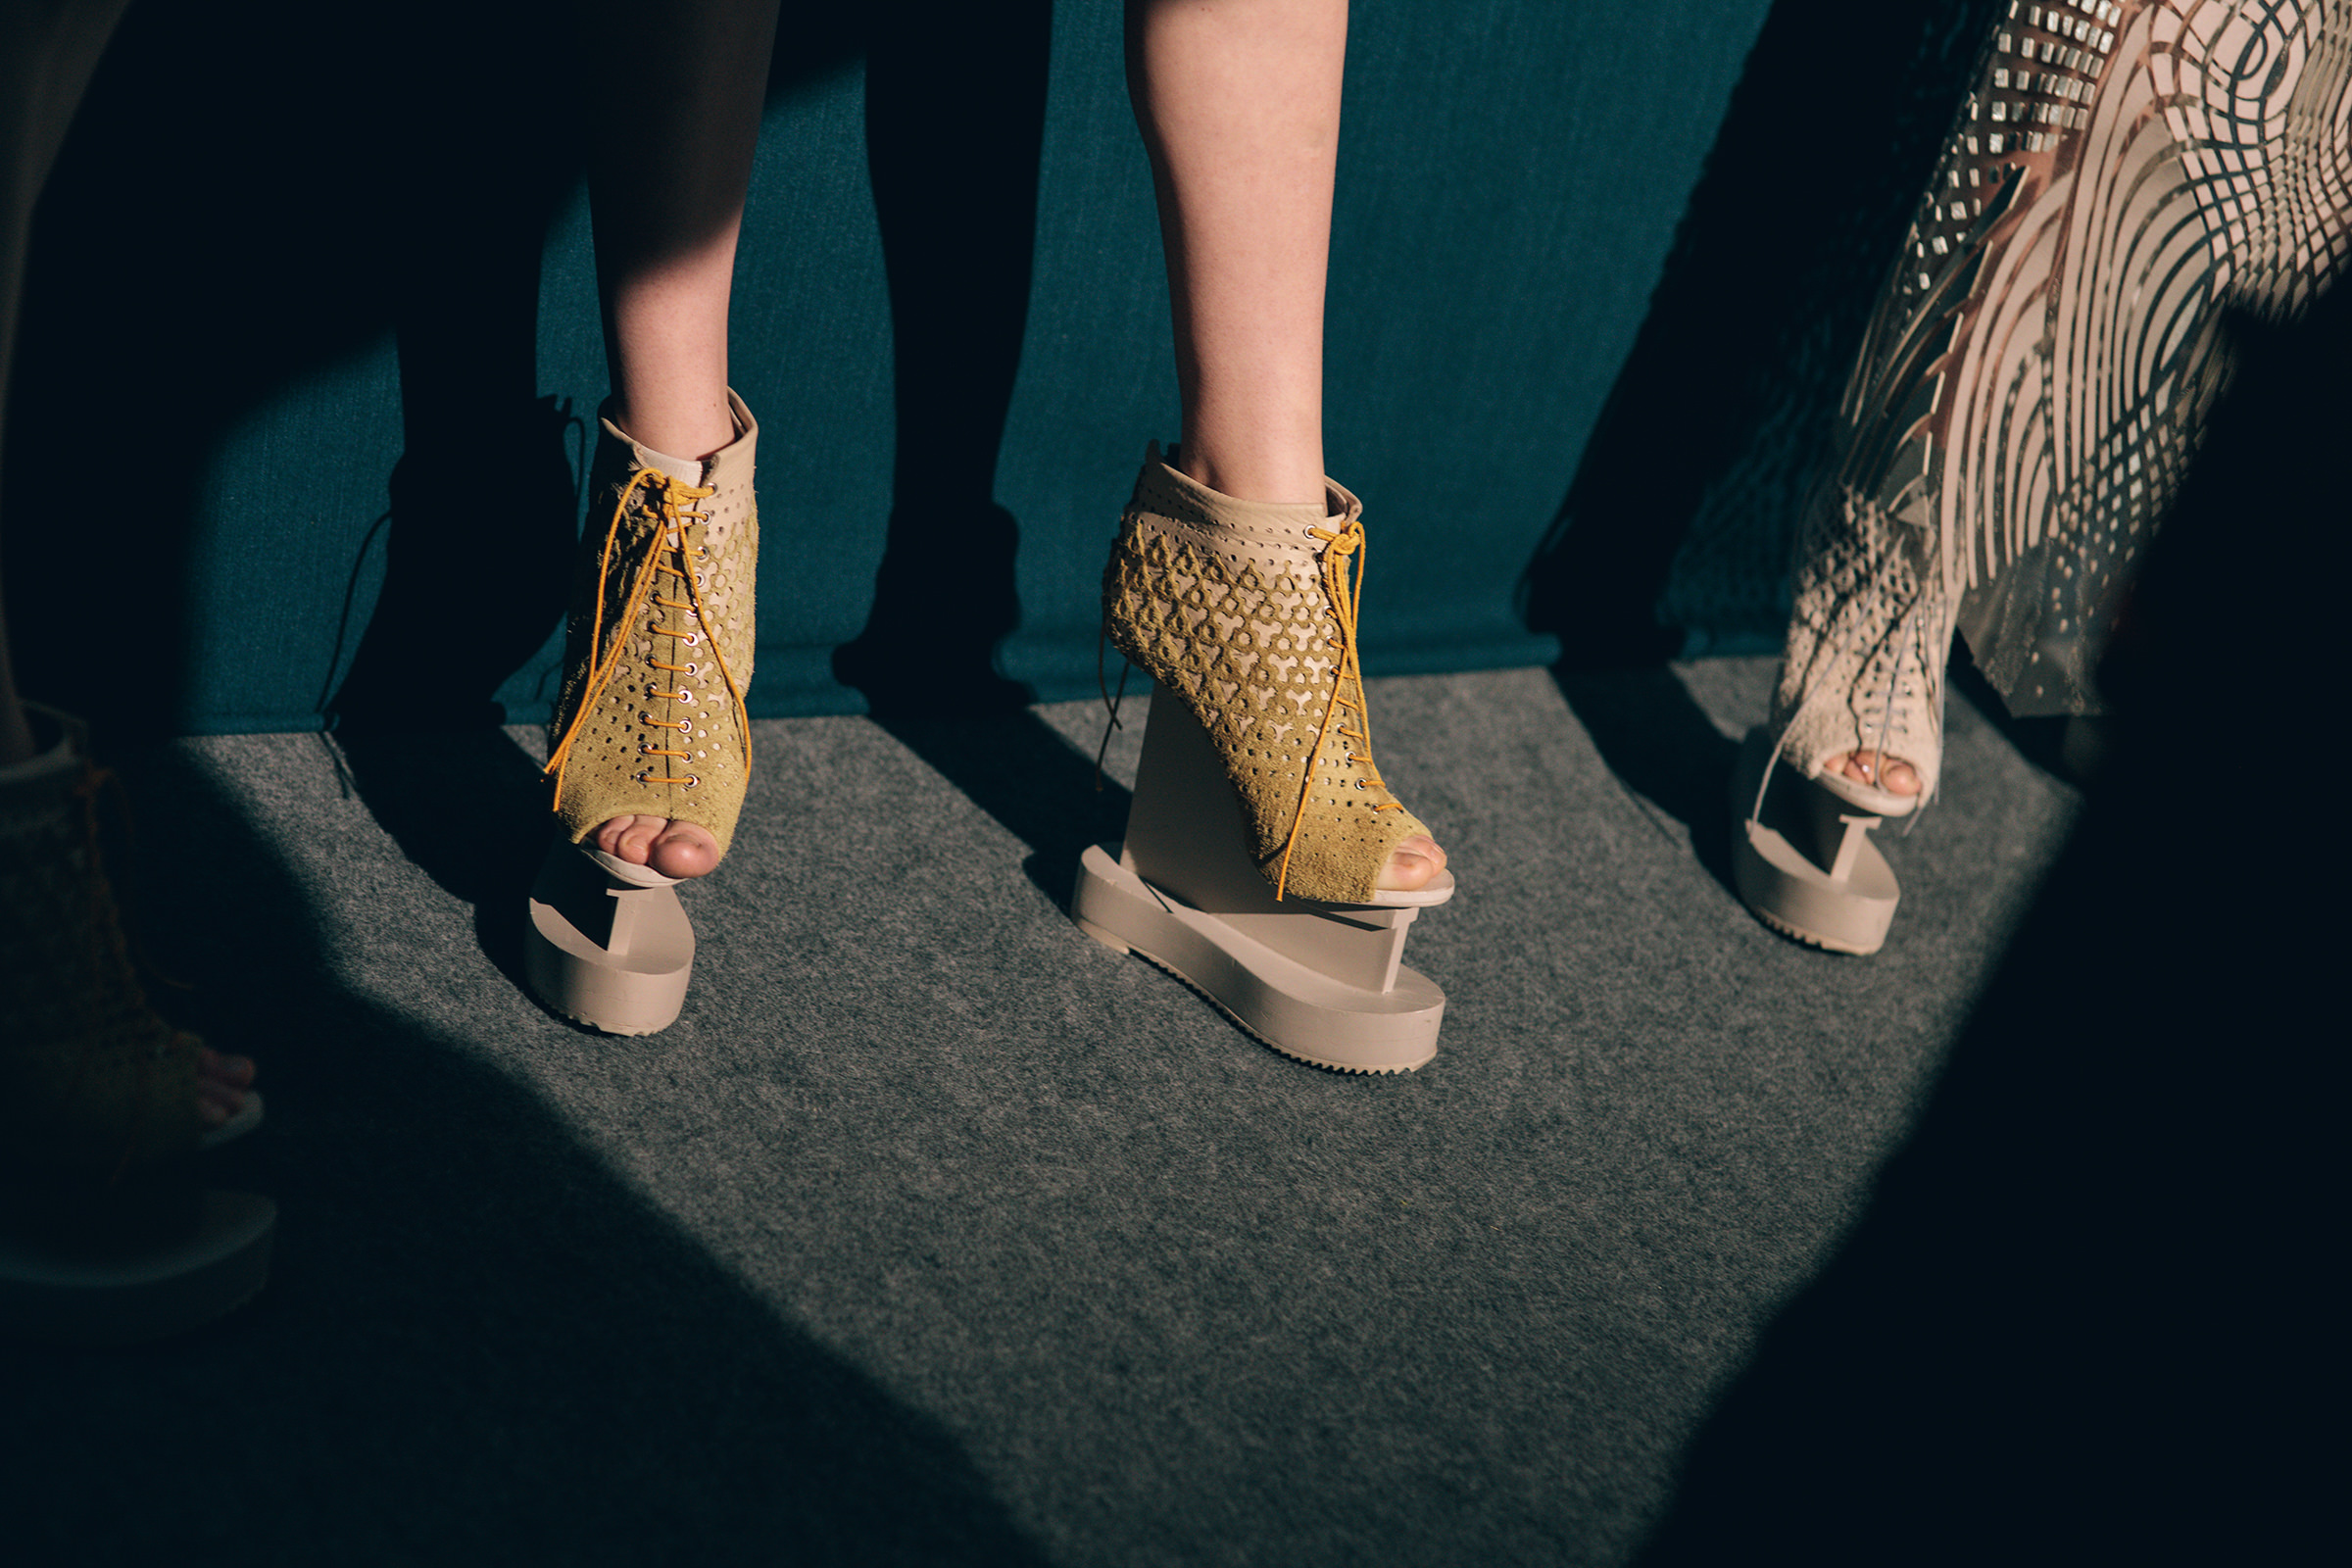 Shoes Backstage at Iris van Herpen Spring/Summer 2018 Haute Couture Fashion Show